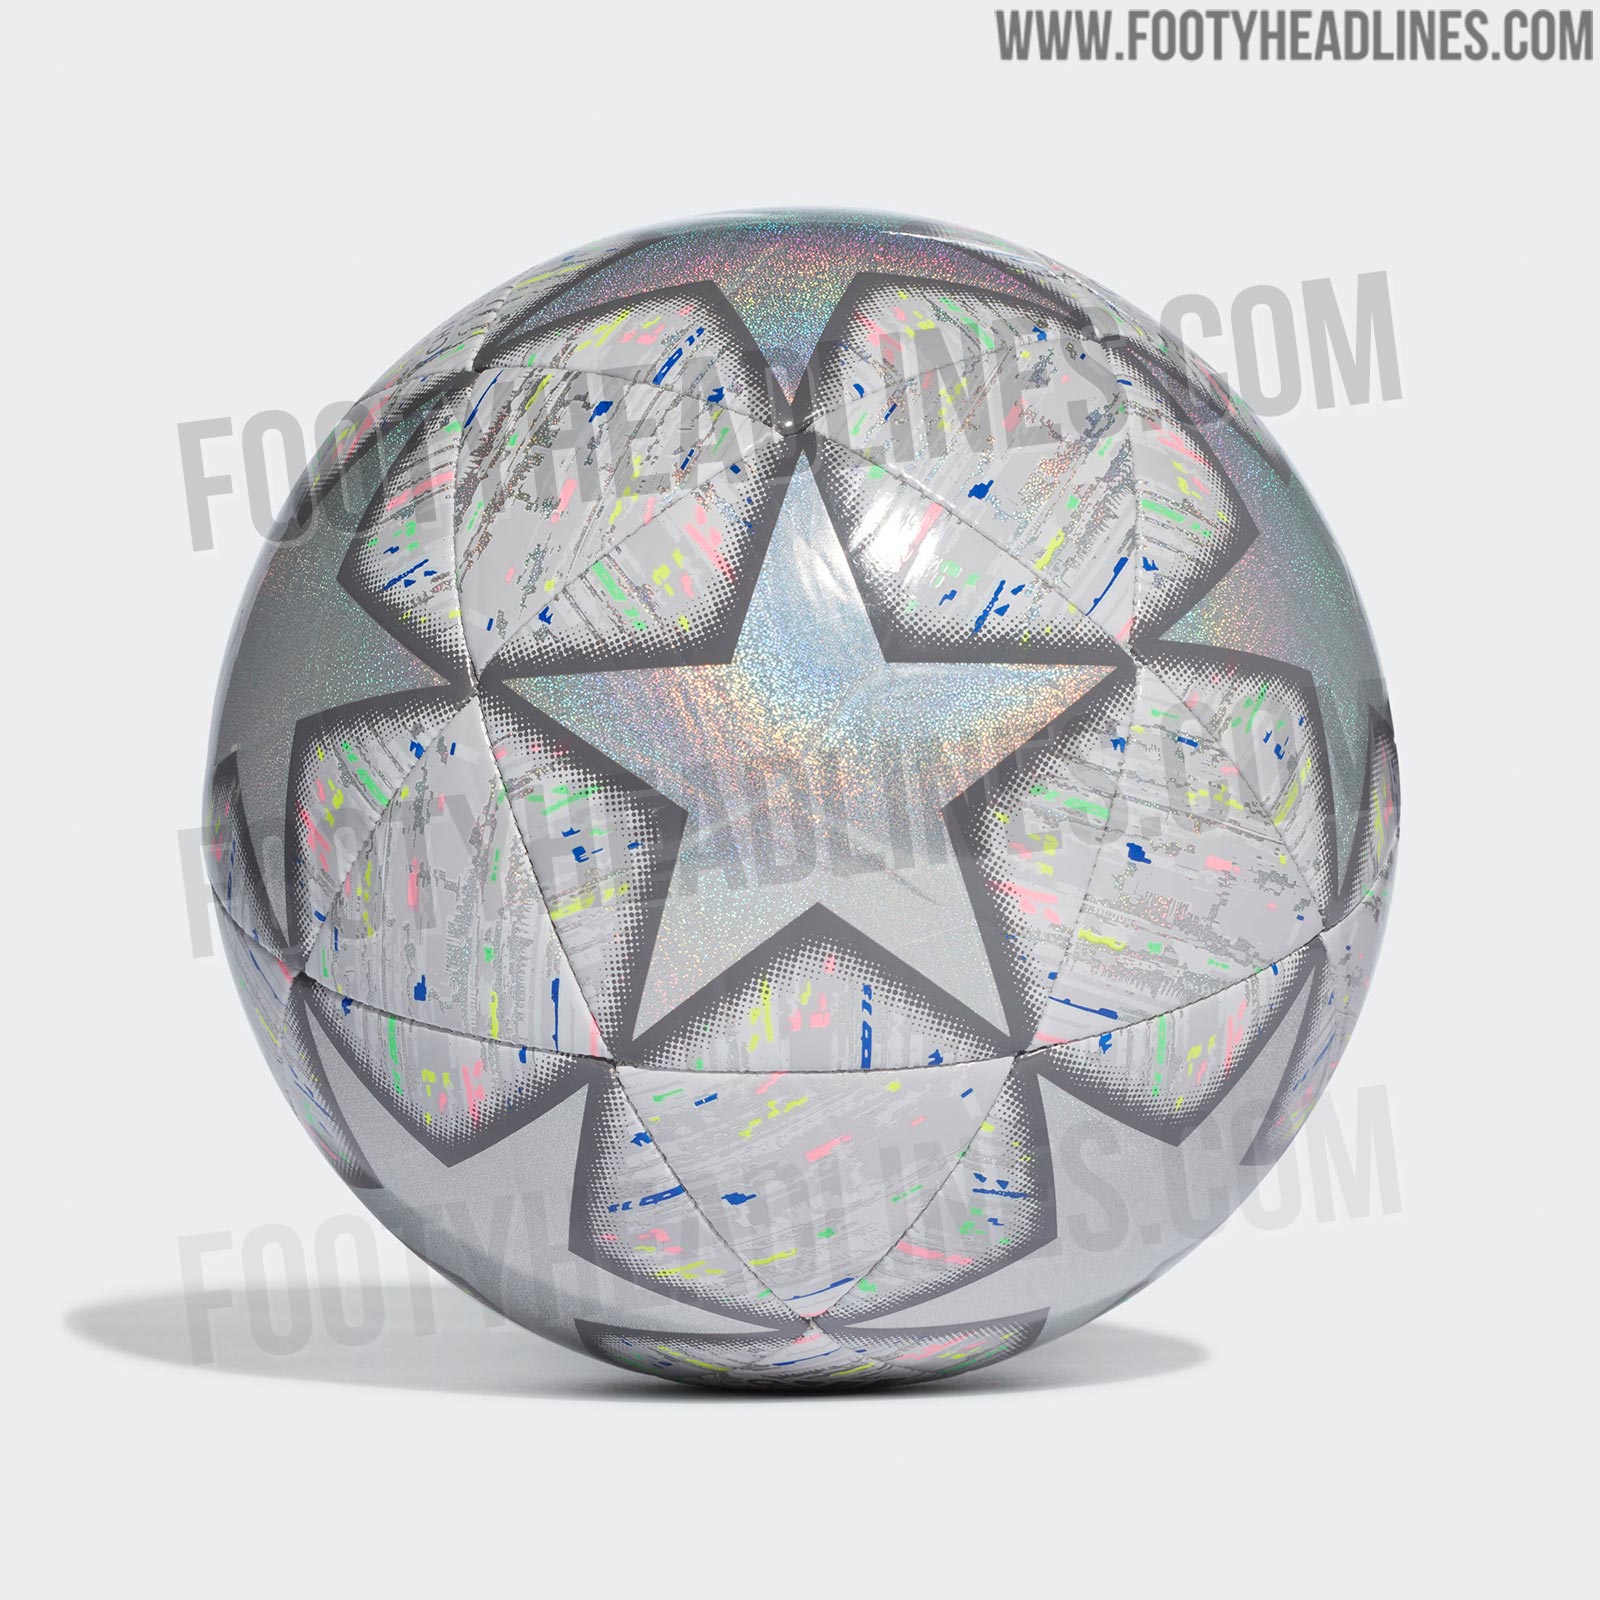 Silver Iridescent Adidas Finale 2019 Champions League Capitano Ball Leaked - Footy Headlines